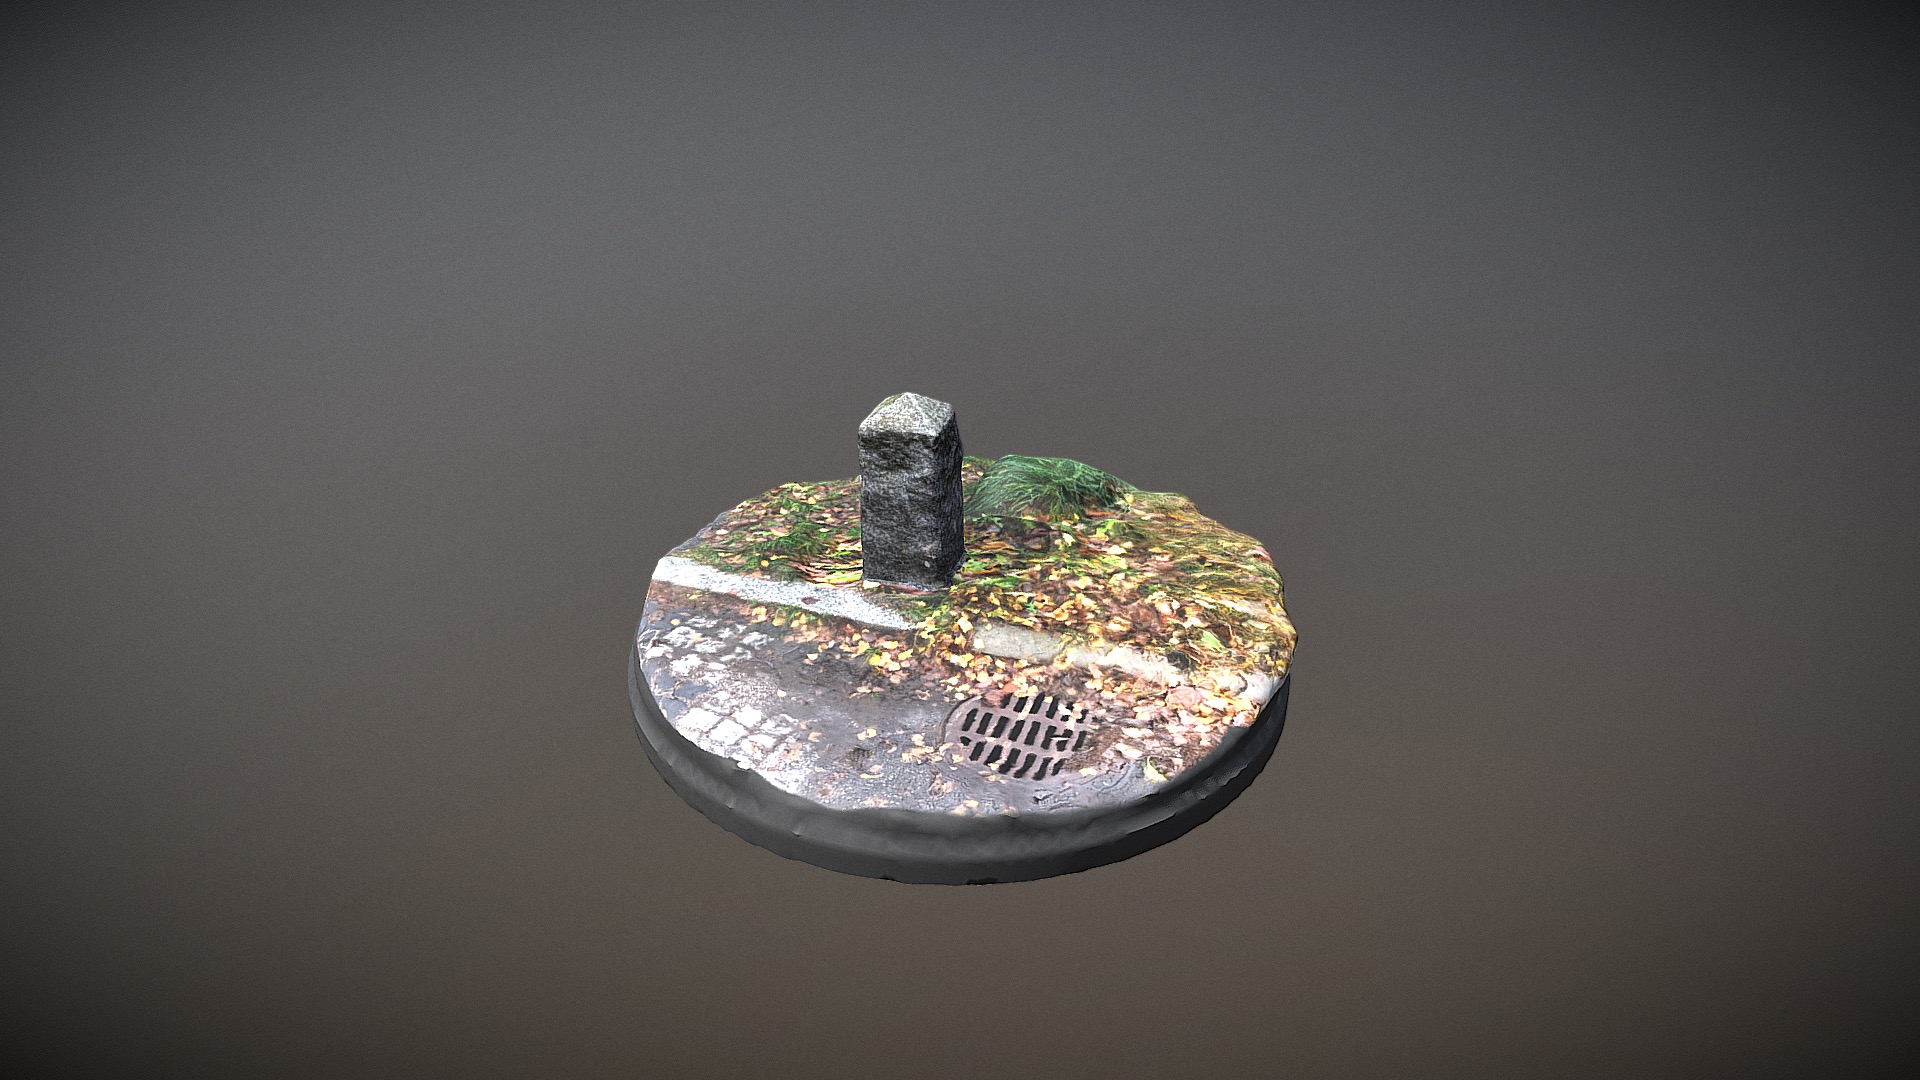 3D model Grey Granite Road pillar 001, Scanned in Finland - This is a 3D model of the Grey Granite Road pillar 001, Scanned in Finland. The 3D model is about a small stone structure with moss growing on it.